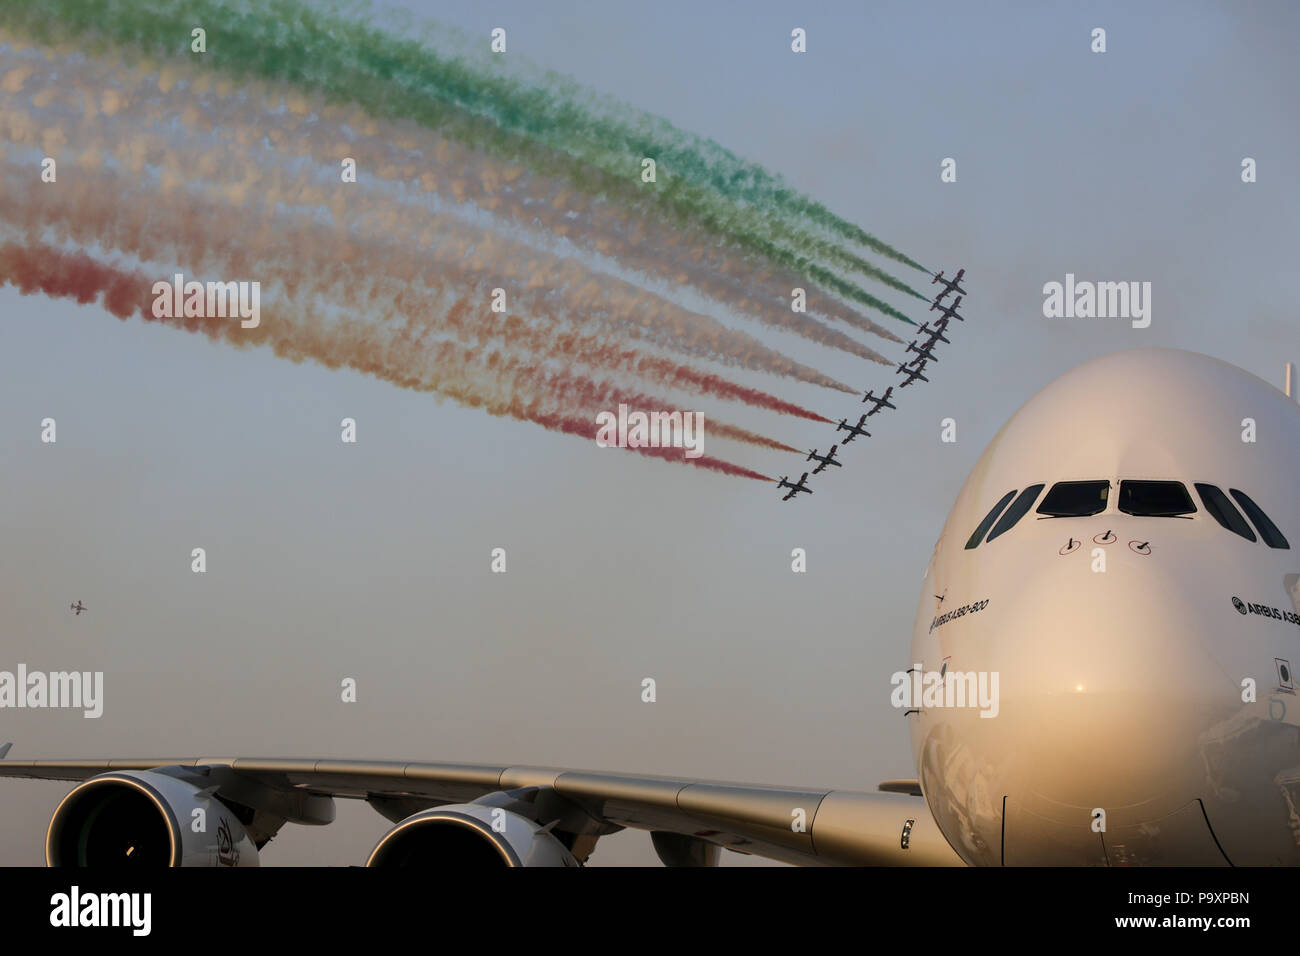 The Frecce Tricolori aerobatic team performs its demonstration flight over Airbus A380 airplane at Dubai International Airshow-2015, UAE Stock Photo